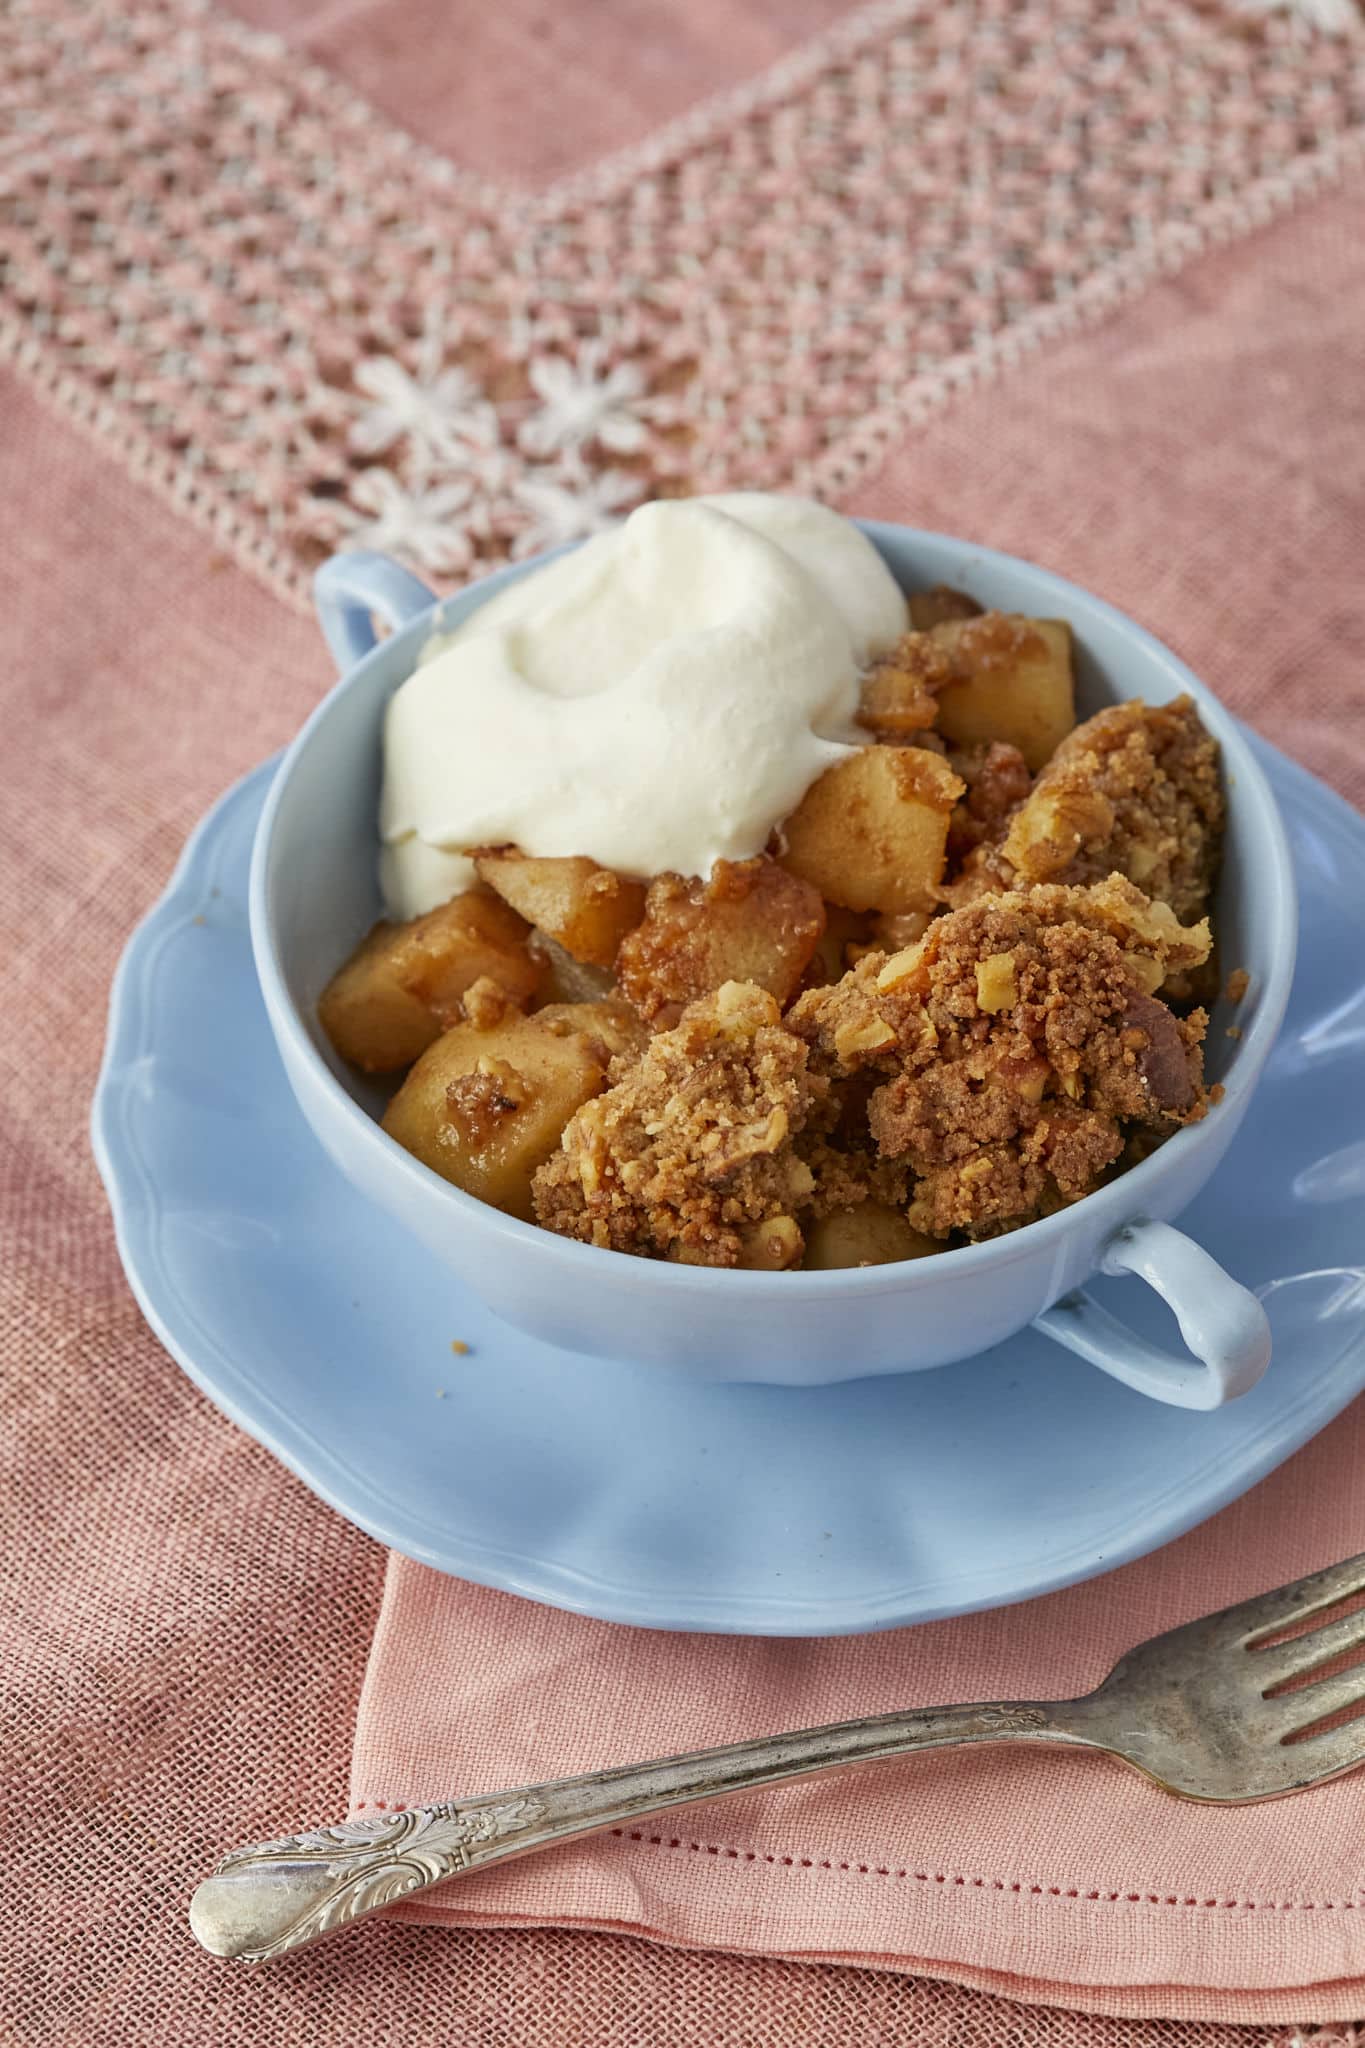 Homemade pear crumble is served in a blue cup on top of a blue saucer with a dollop of whipped cream.